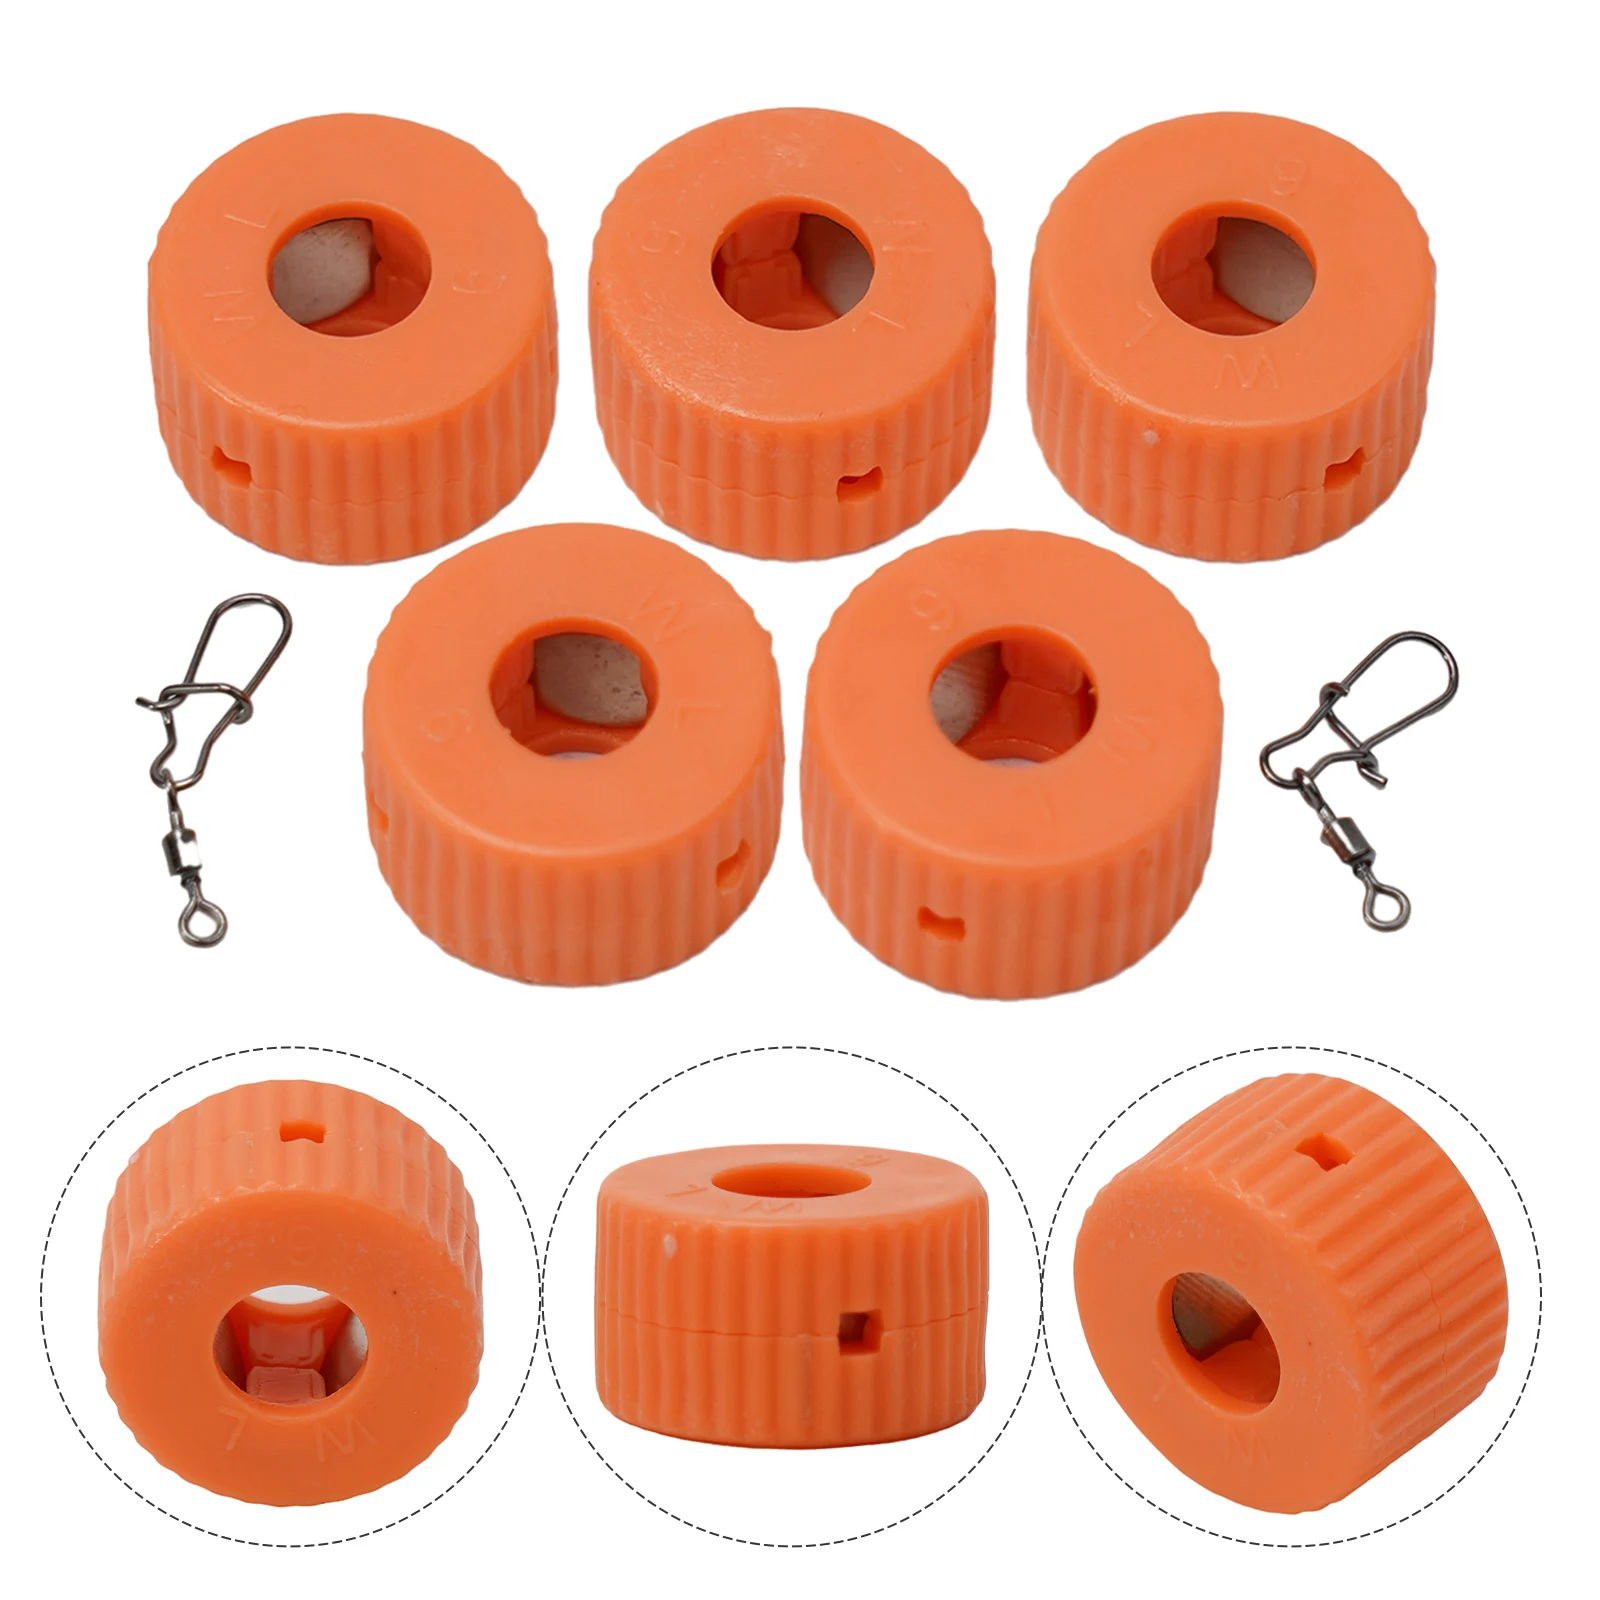 

Magnet Booster Mini Magnetizer Ring 18mm*10mm Plastic Material Without Demagnetizer Function For Screwdriver Bit